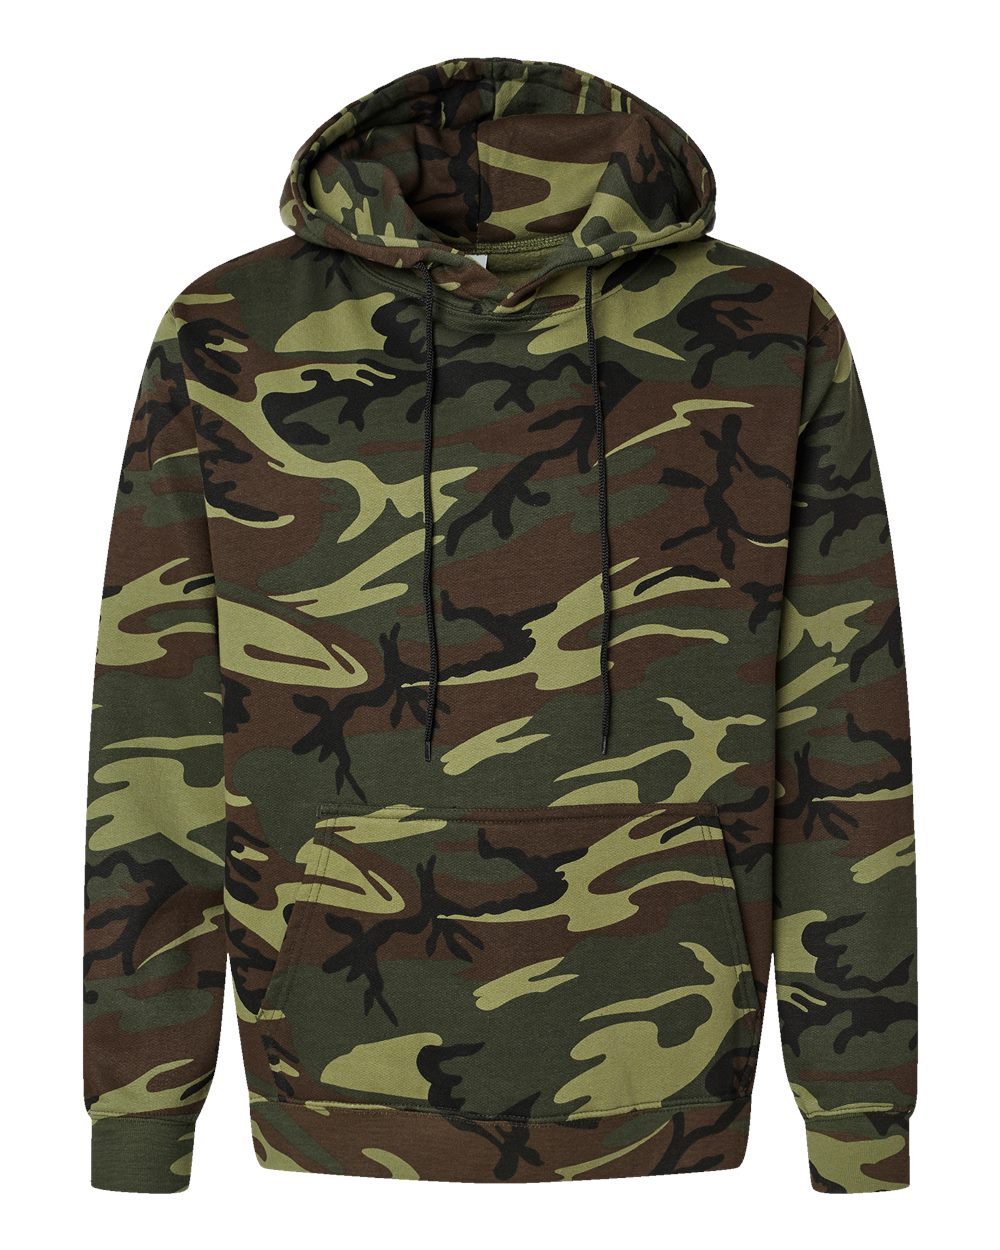 Code Five Mens Adult Camo Pullover Fleece Hoodie Hooded 3969 up to 3XL ...